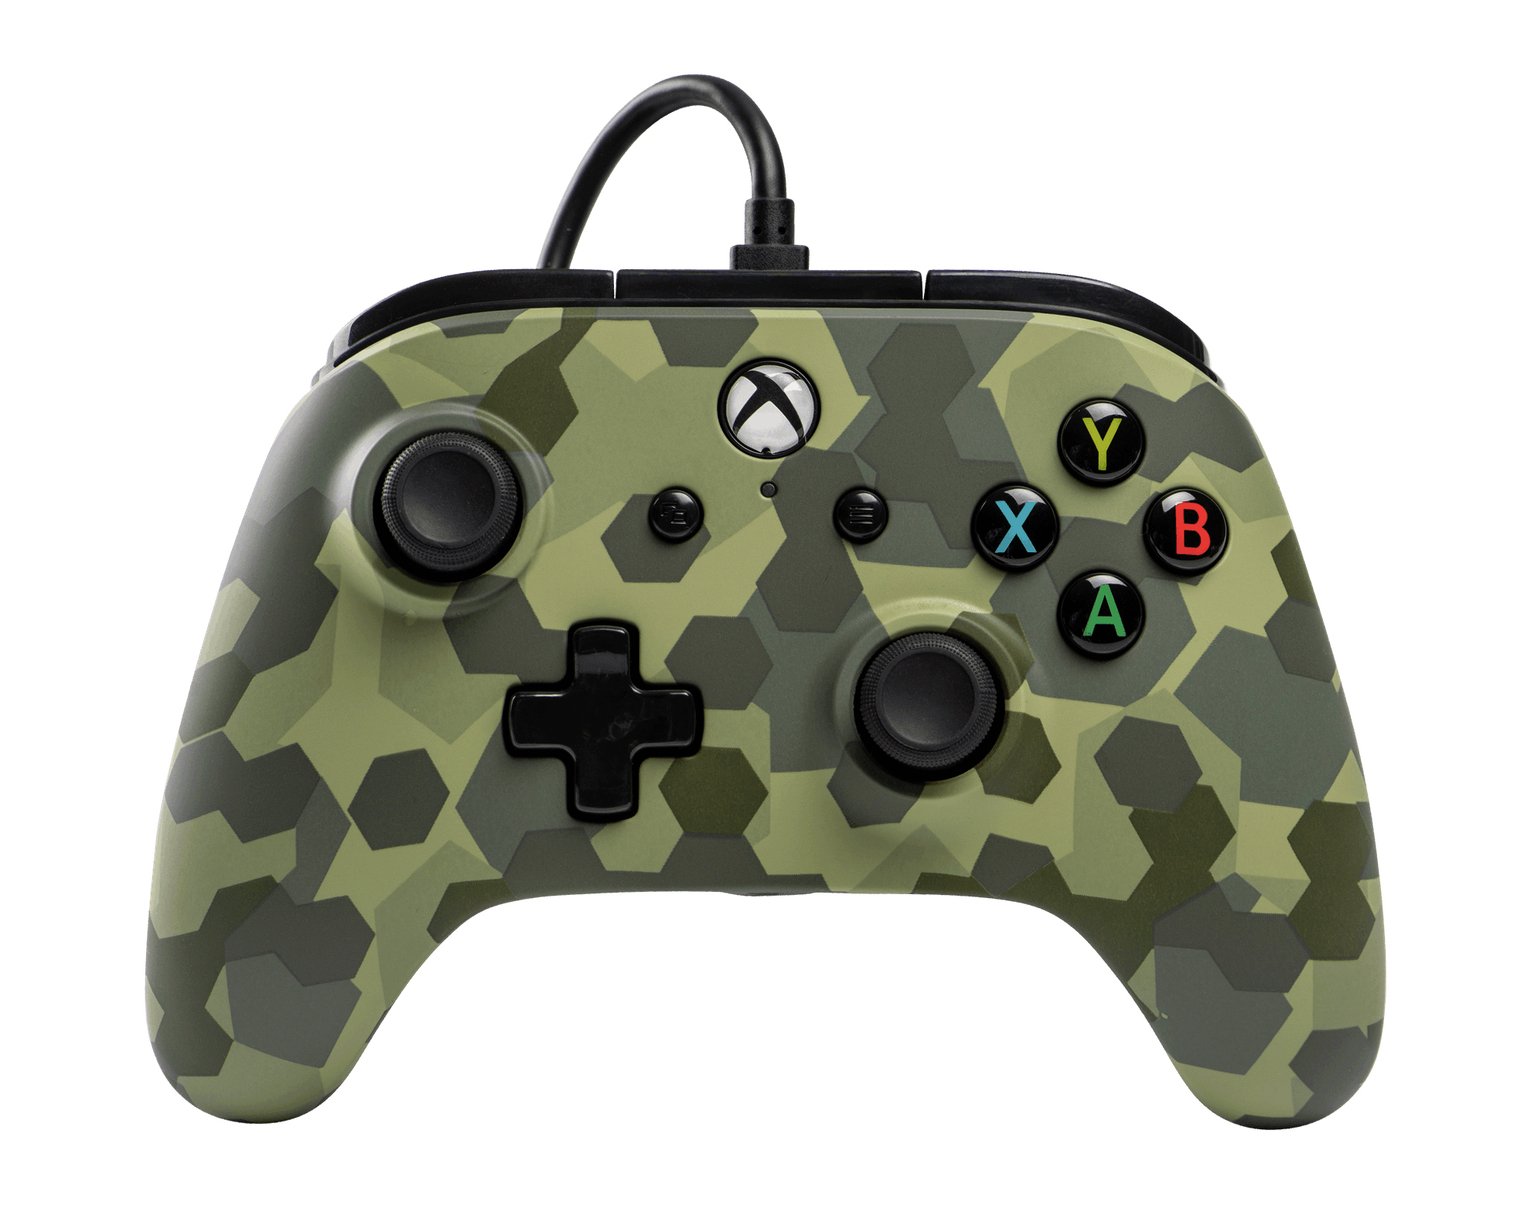 PowerA Wired Controller for Xbox One - Deep Jungle Camo